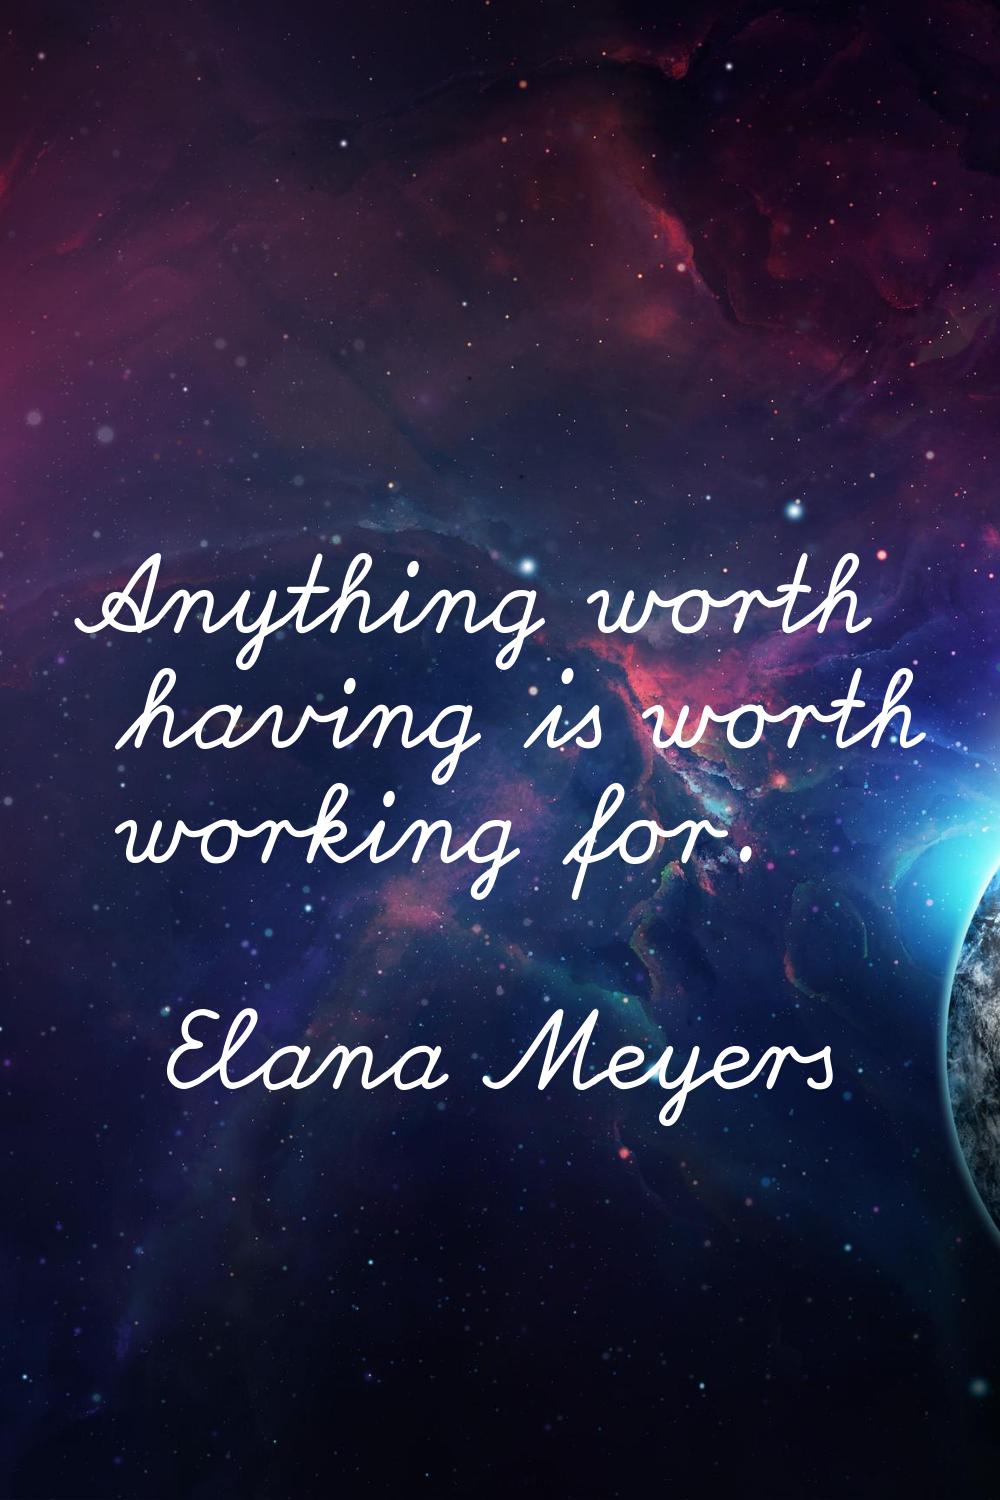 Anything worth having is worth working for.